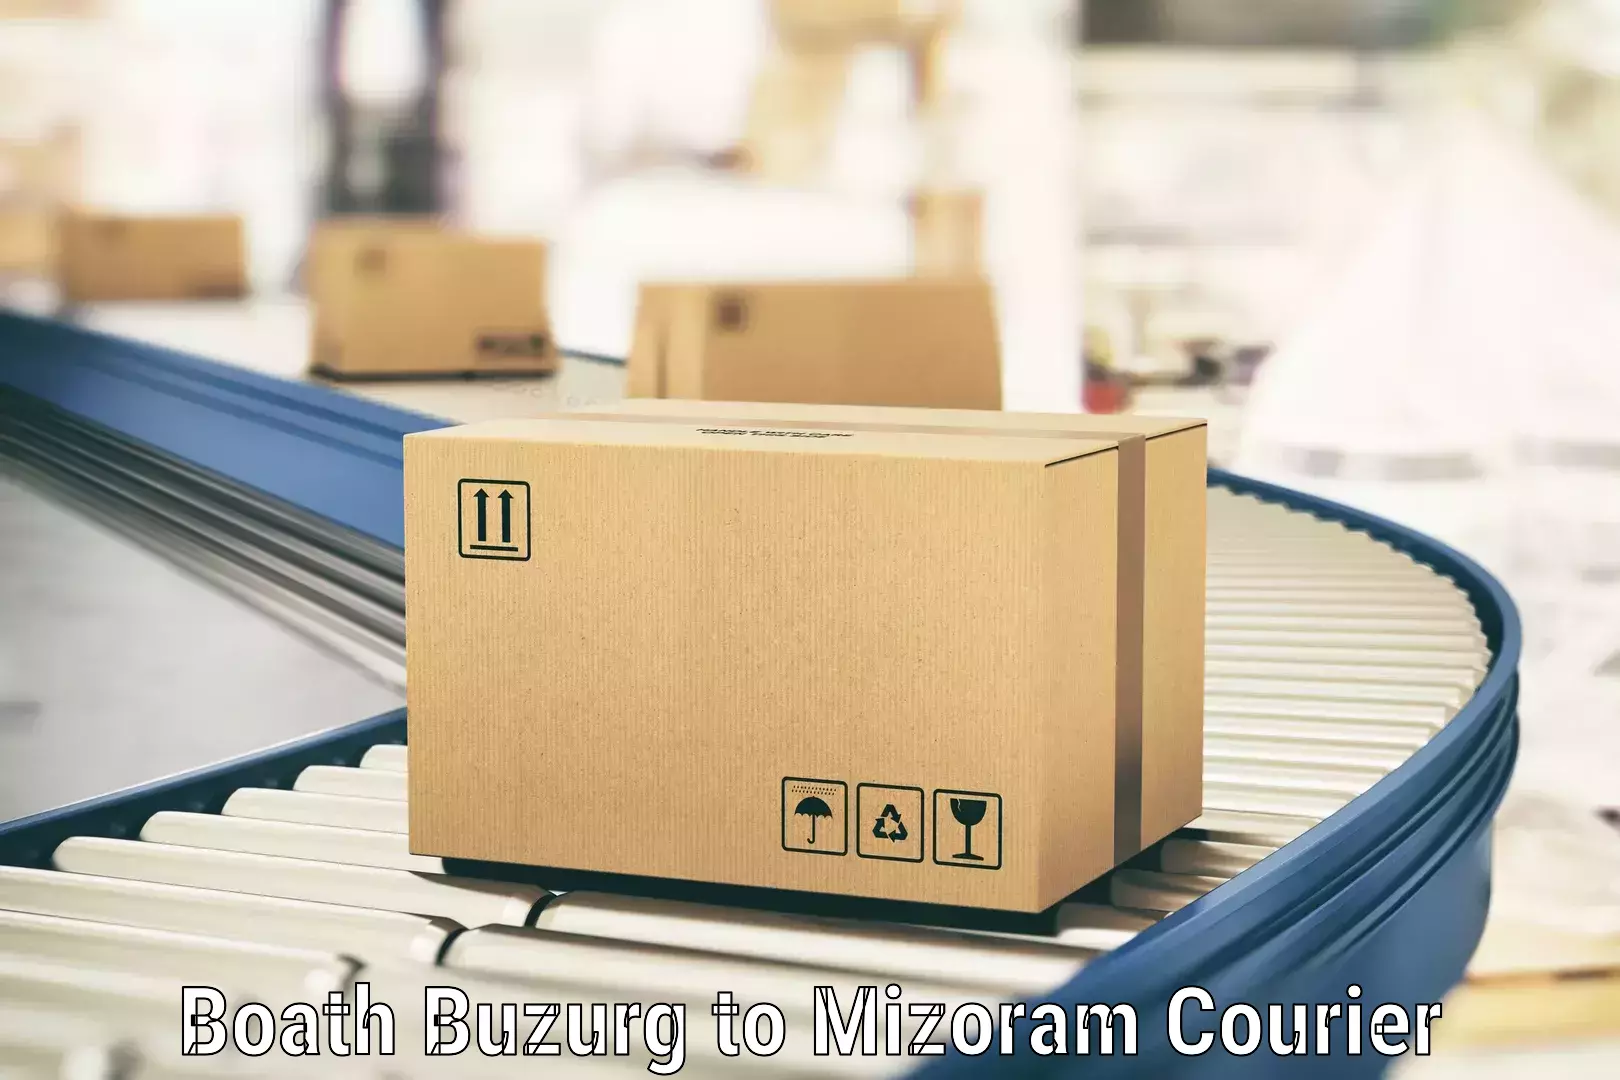 Nationwide shipping services Boath Buzurg to Darlawn